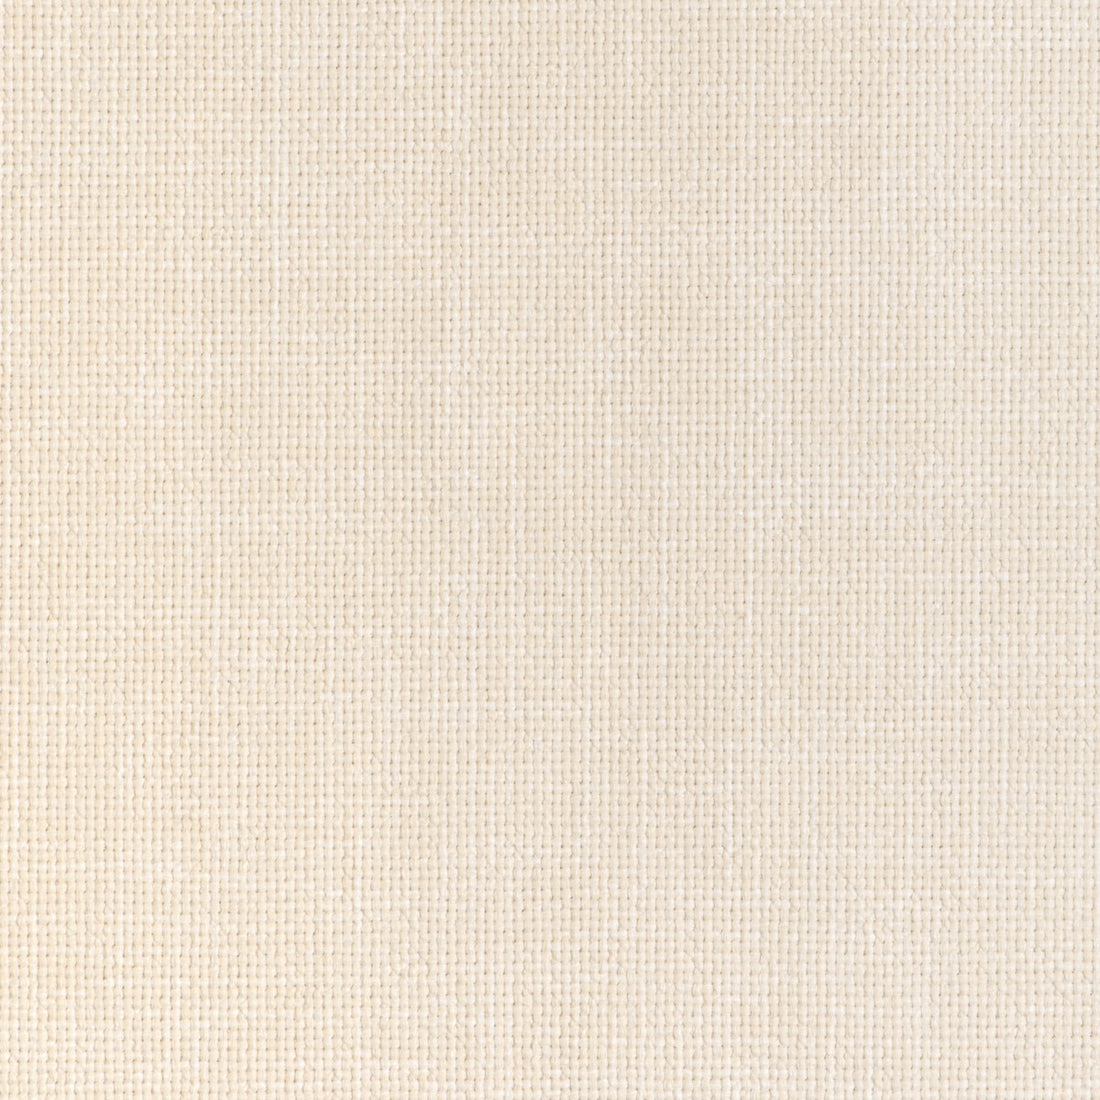 Les Canevas Plain fabric in bone color - pattern 8024114.1.0 - by Brunschwig &amp; Fils in the Les Ensembliers L&